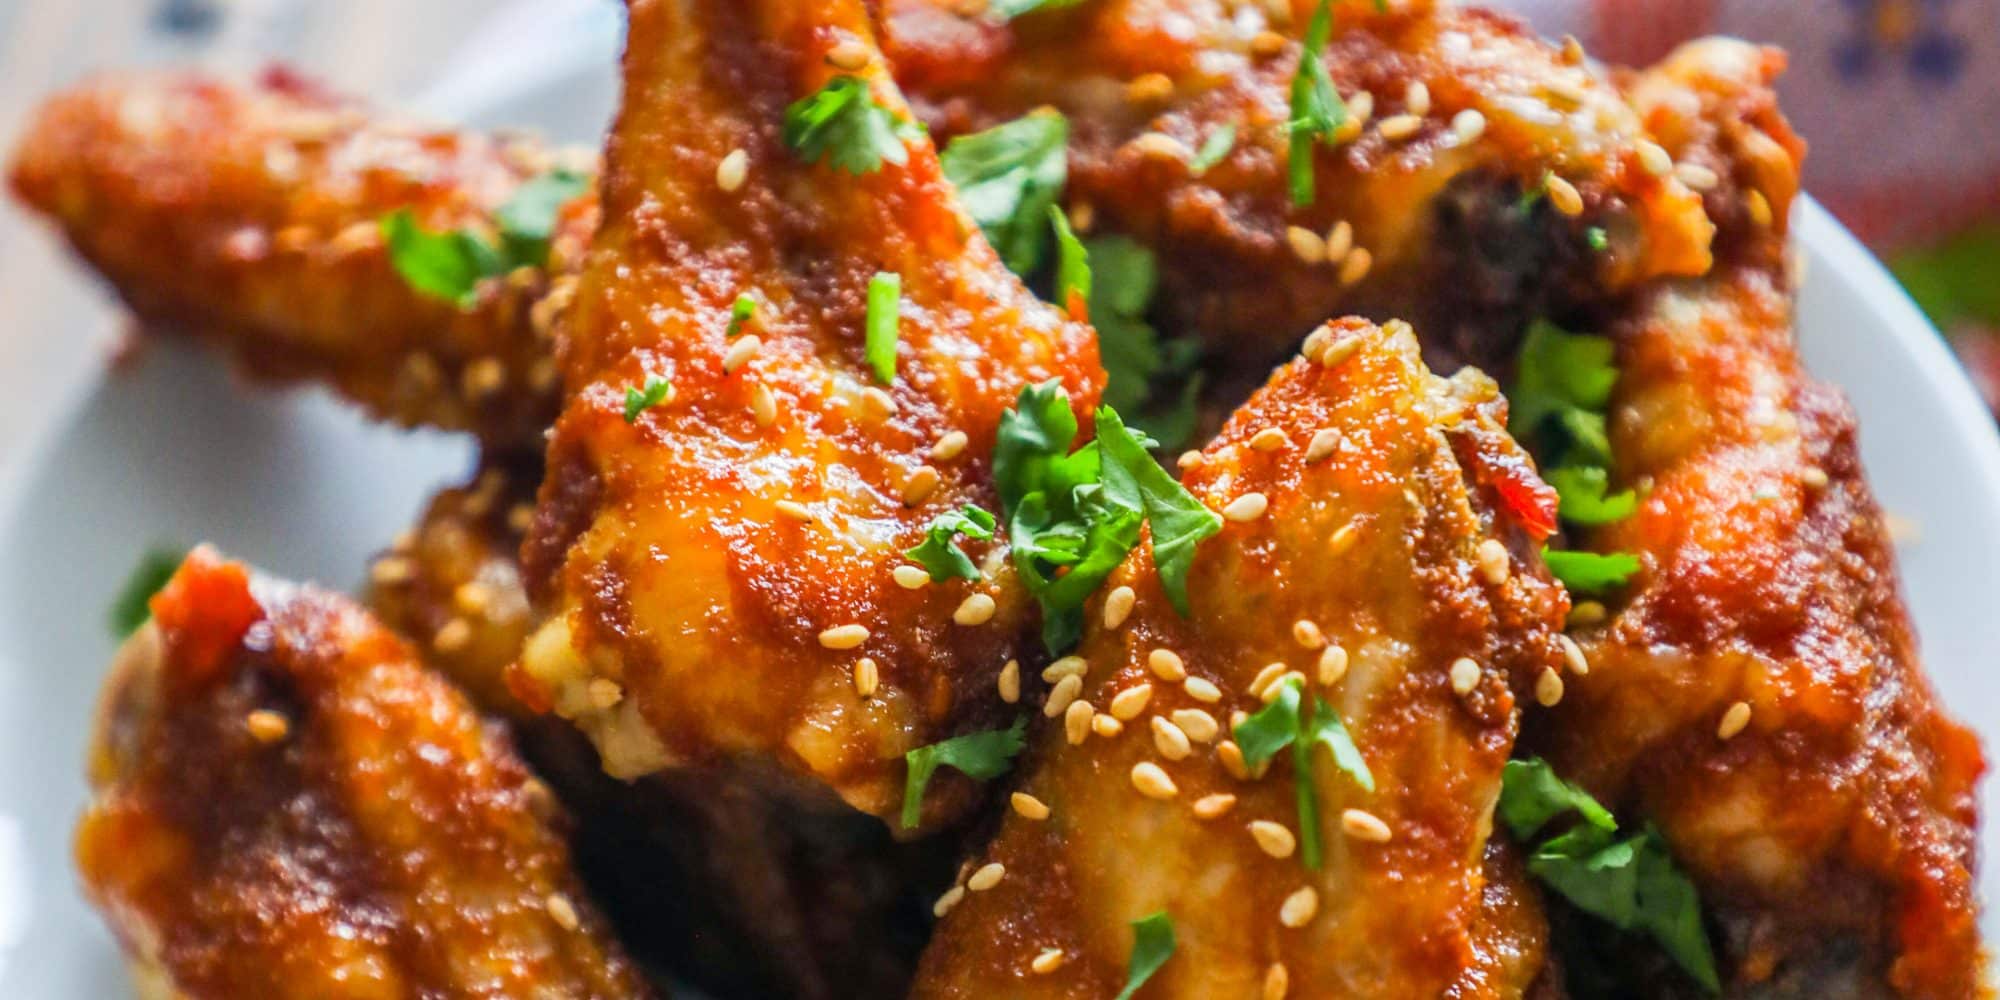 https://sweetcsdesigns.com/wp-content/uploads/2017/02/Sweet-and-Spicy-Crunchy-Baked-wings-yum-.jpg